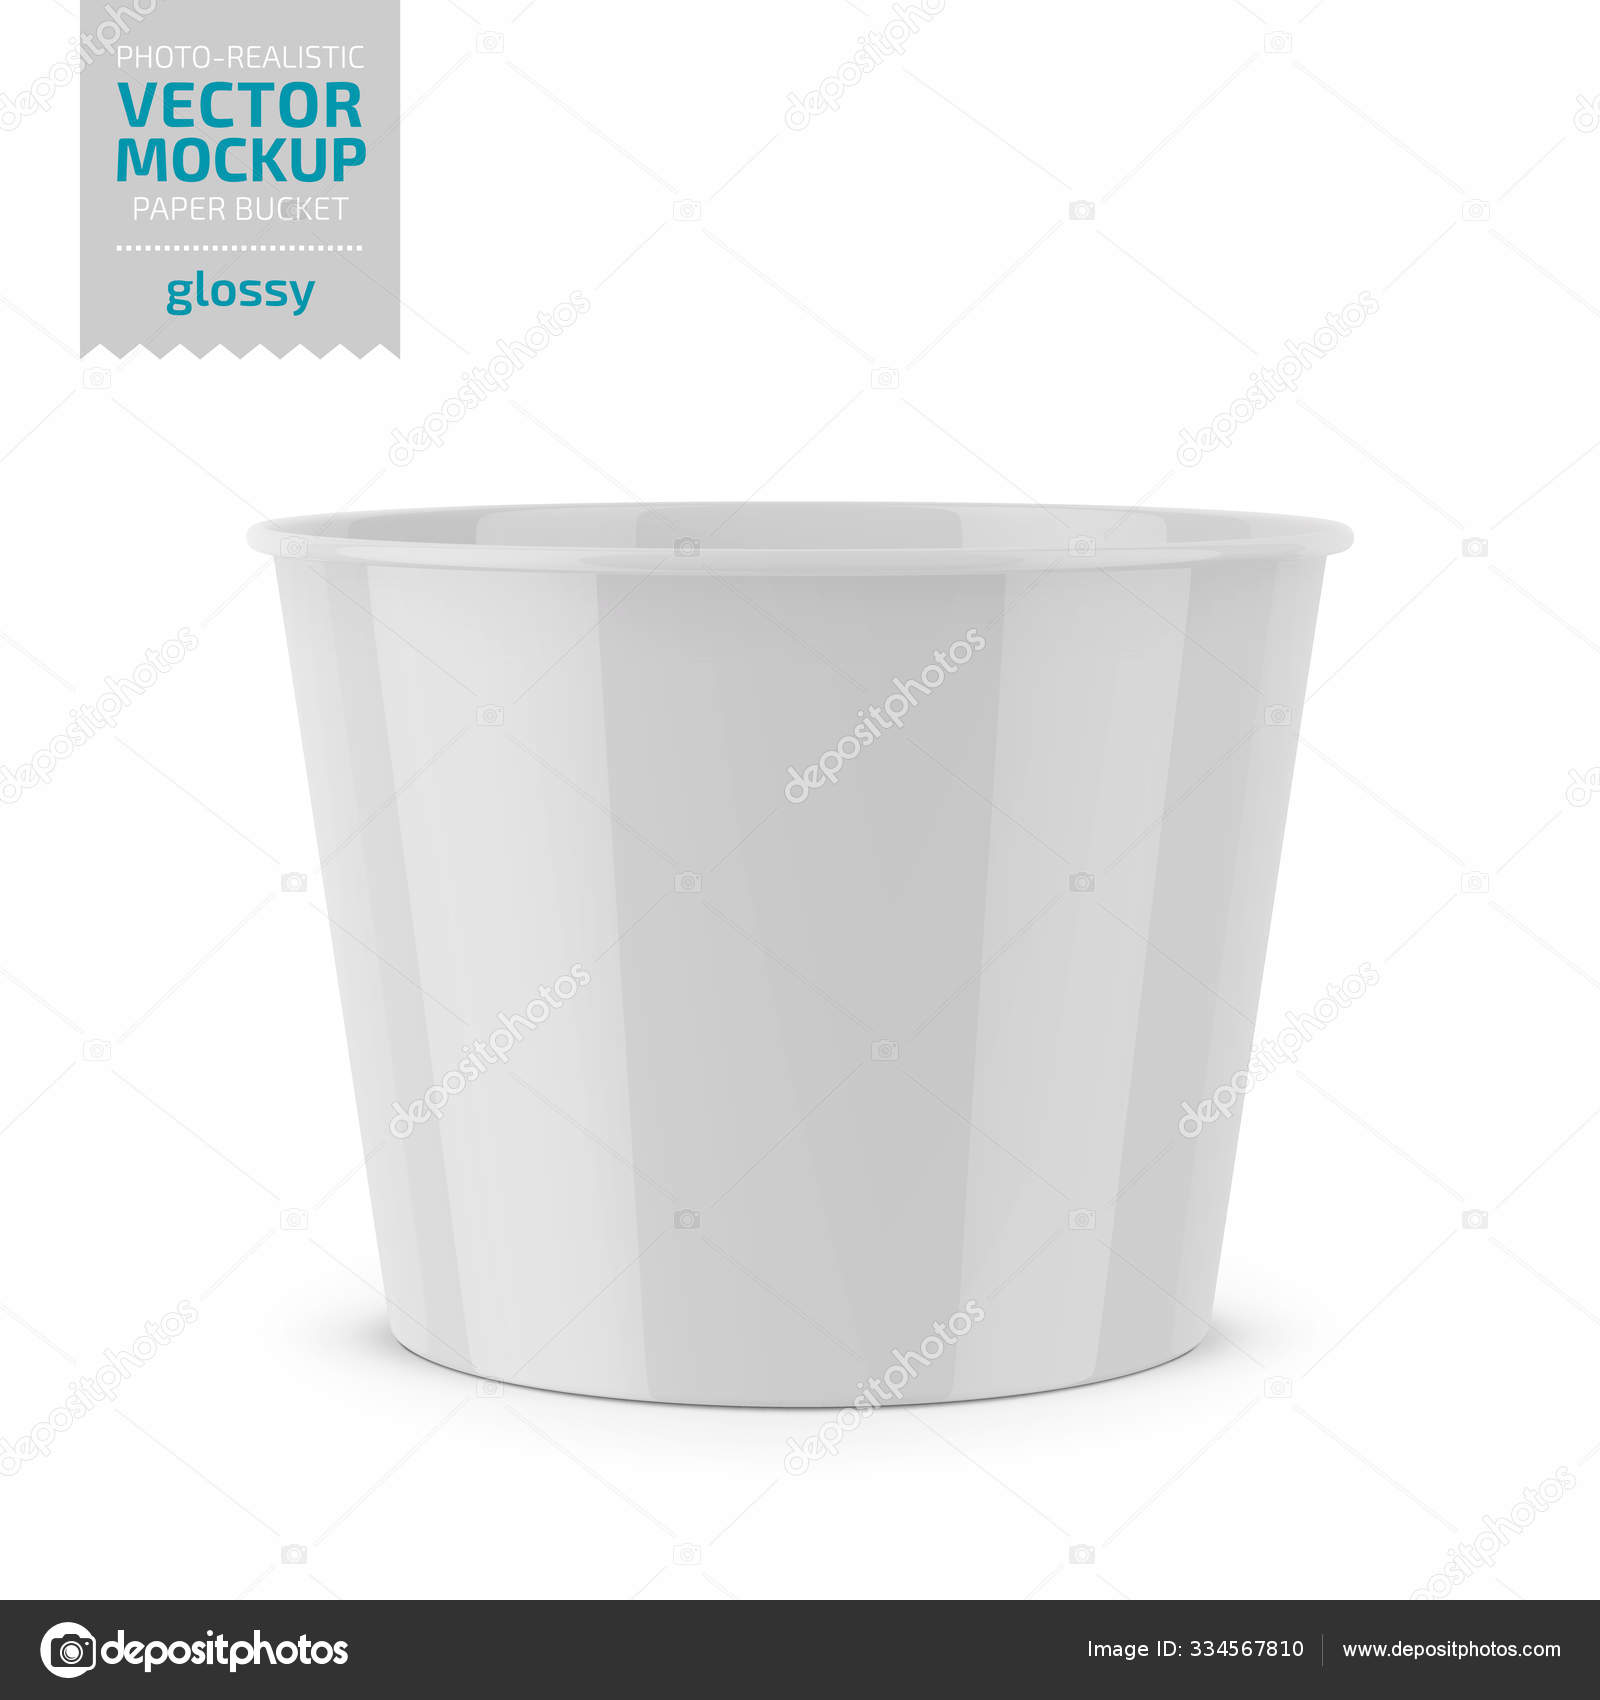 Download White Glossy Paper Food Bucket Vector Mockup Vector Image By C Gruffi Vector Stock 334567810